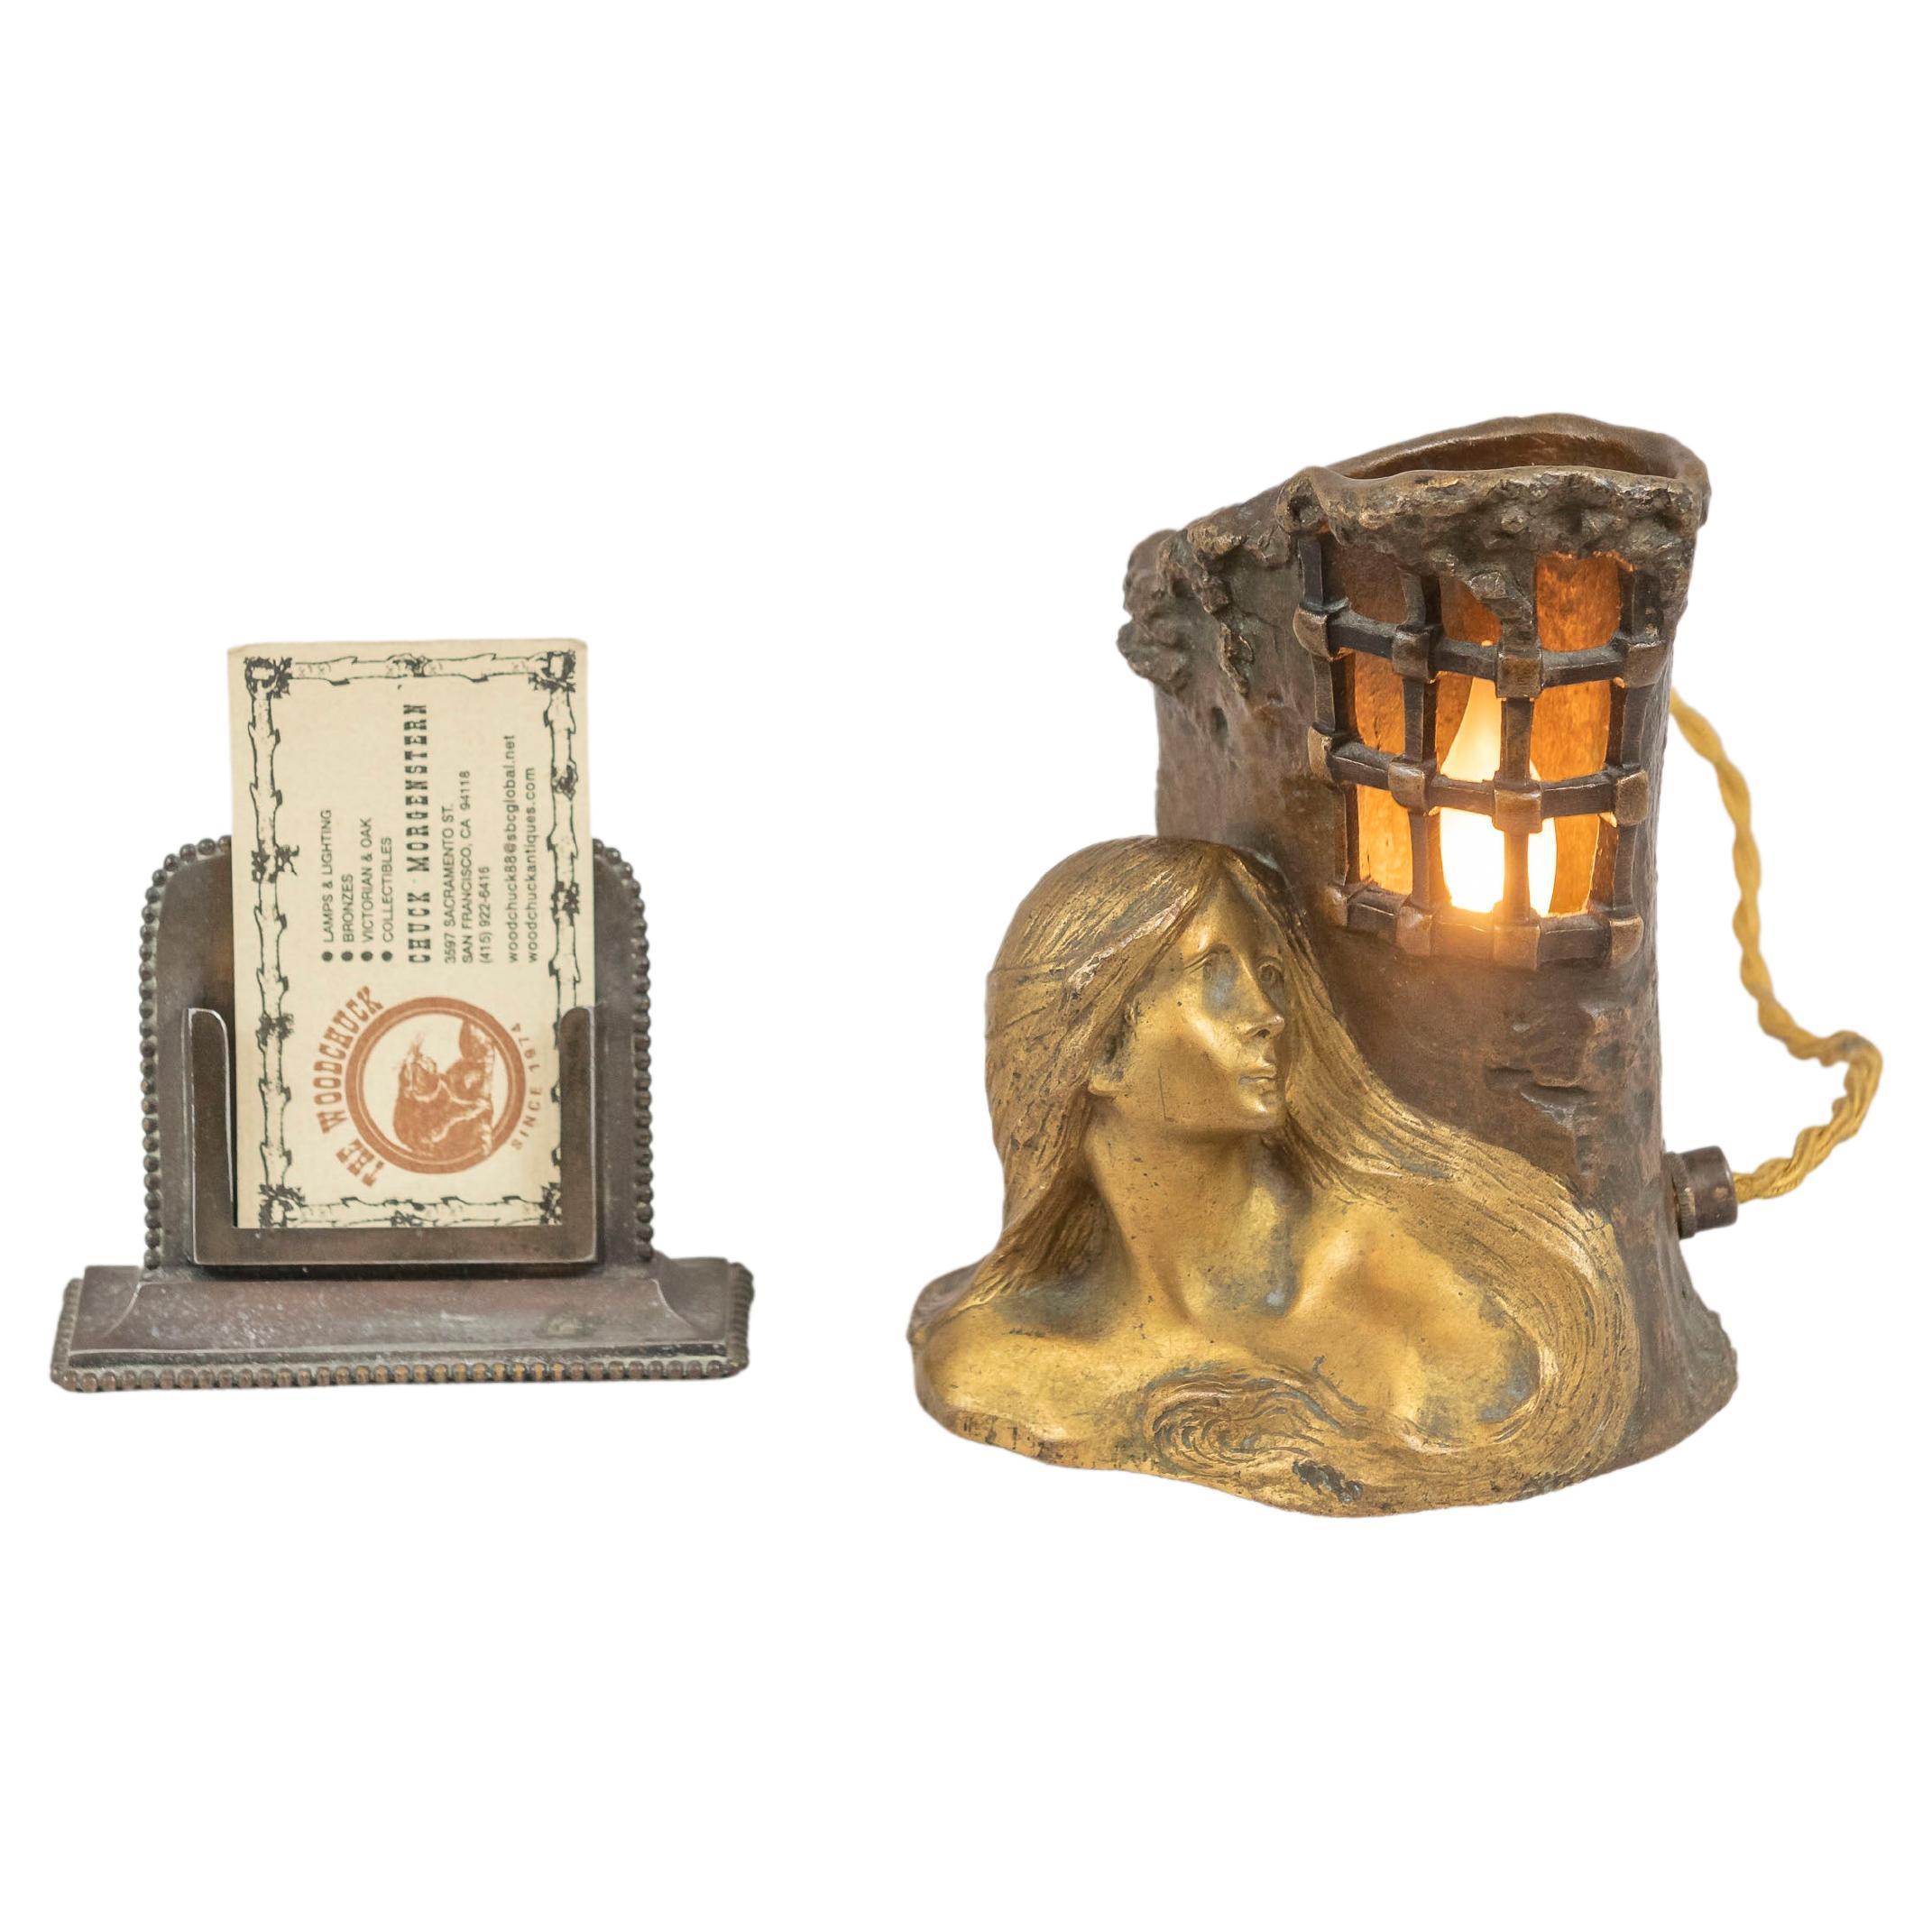 Allegorical French Art Nouveau Gilt & Patinated Bronze Lamp w/ Bust of Maiden